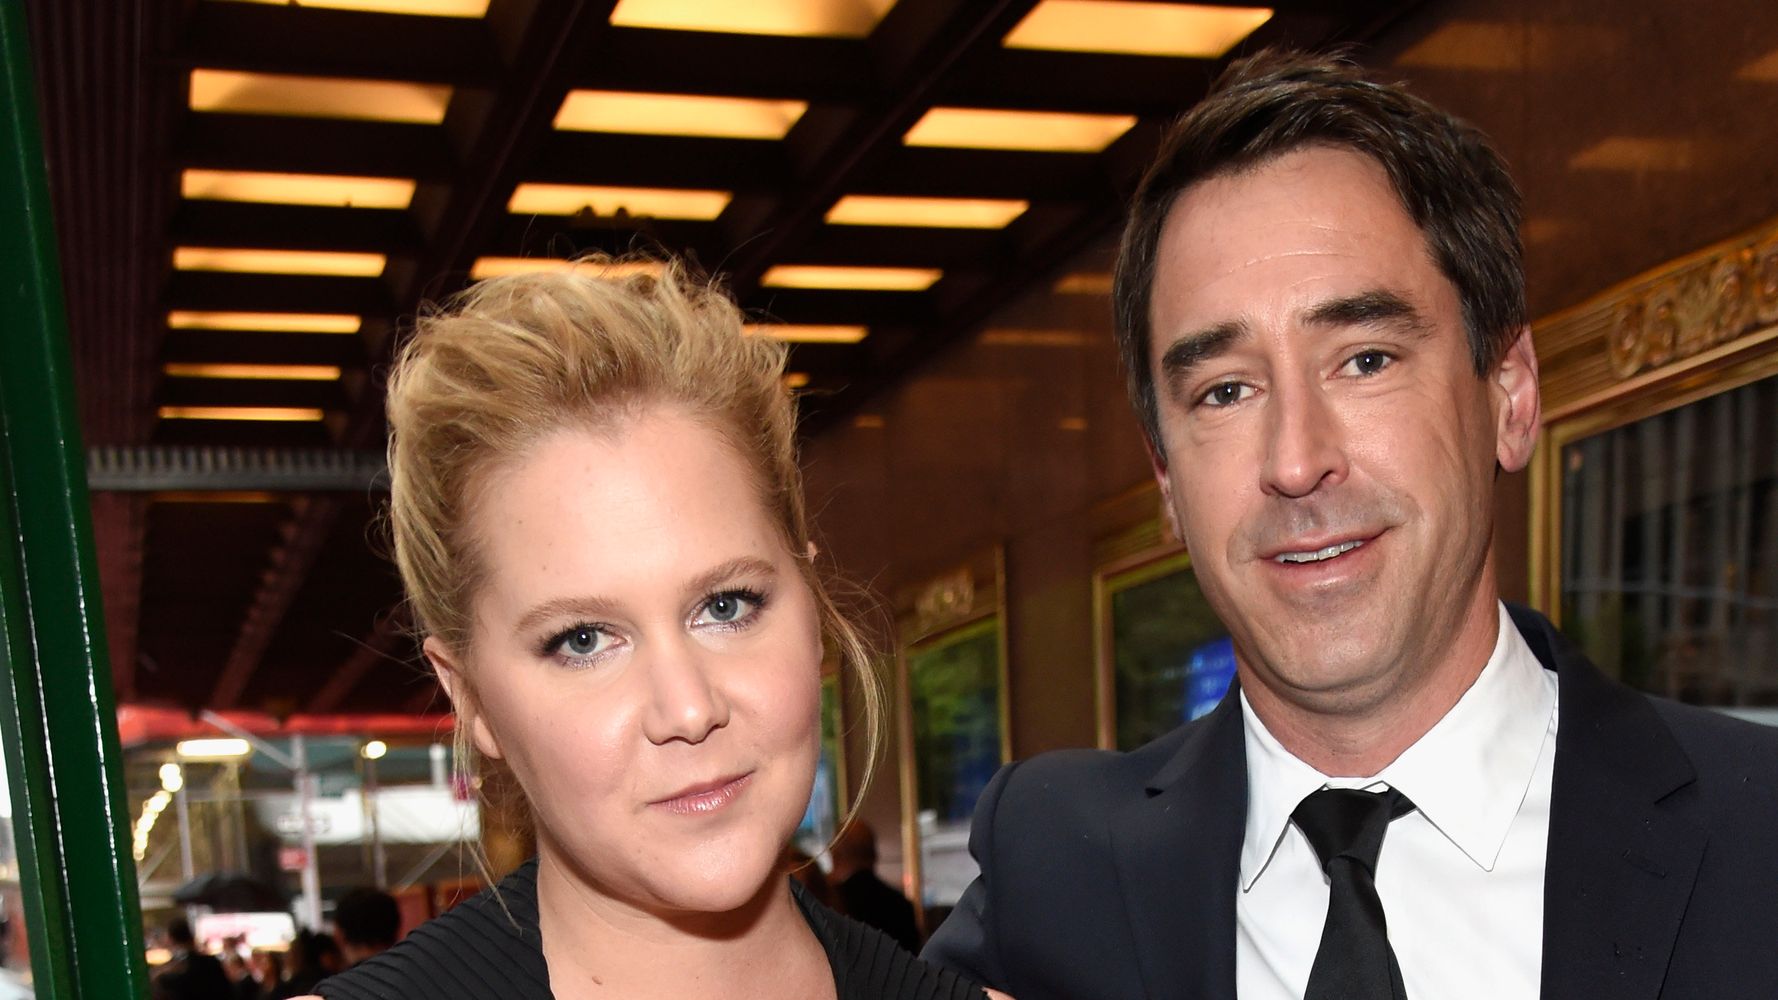 Amy Schumer And Husband Chris Fischer Make Red Carpet Debut At The 2018 Awards | Life